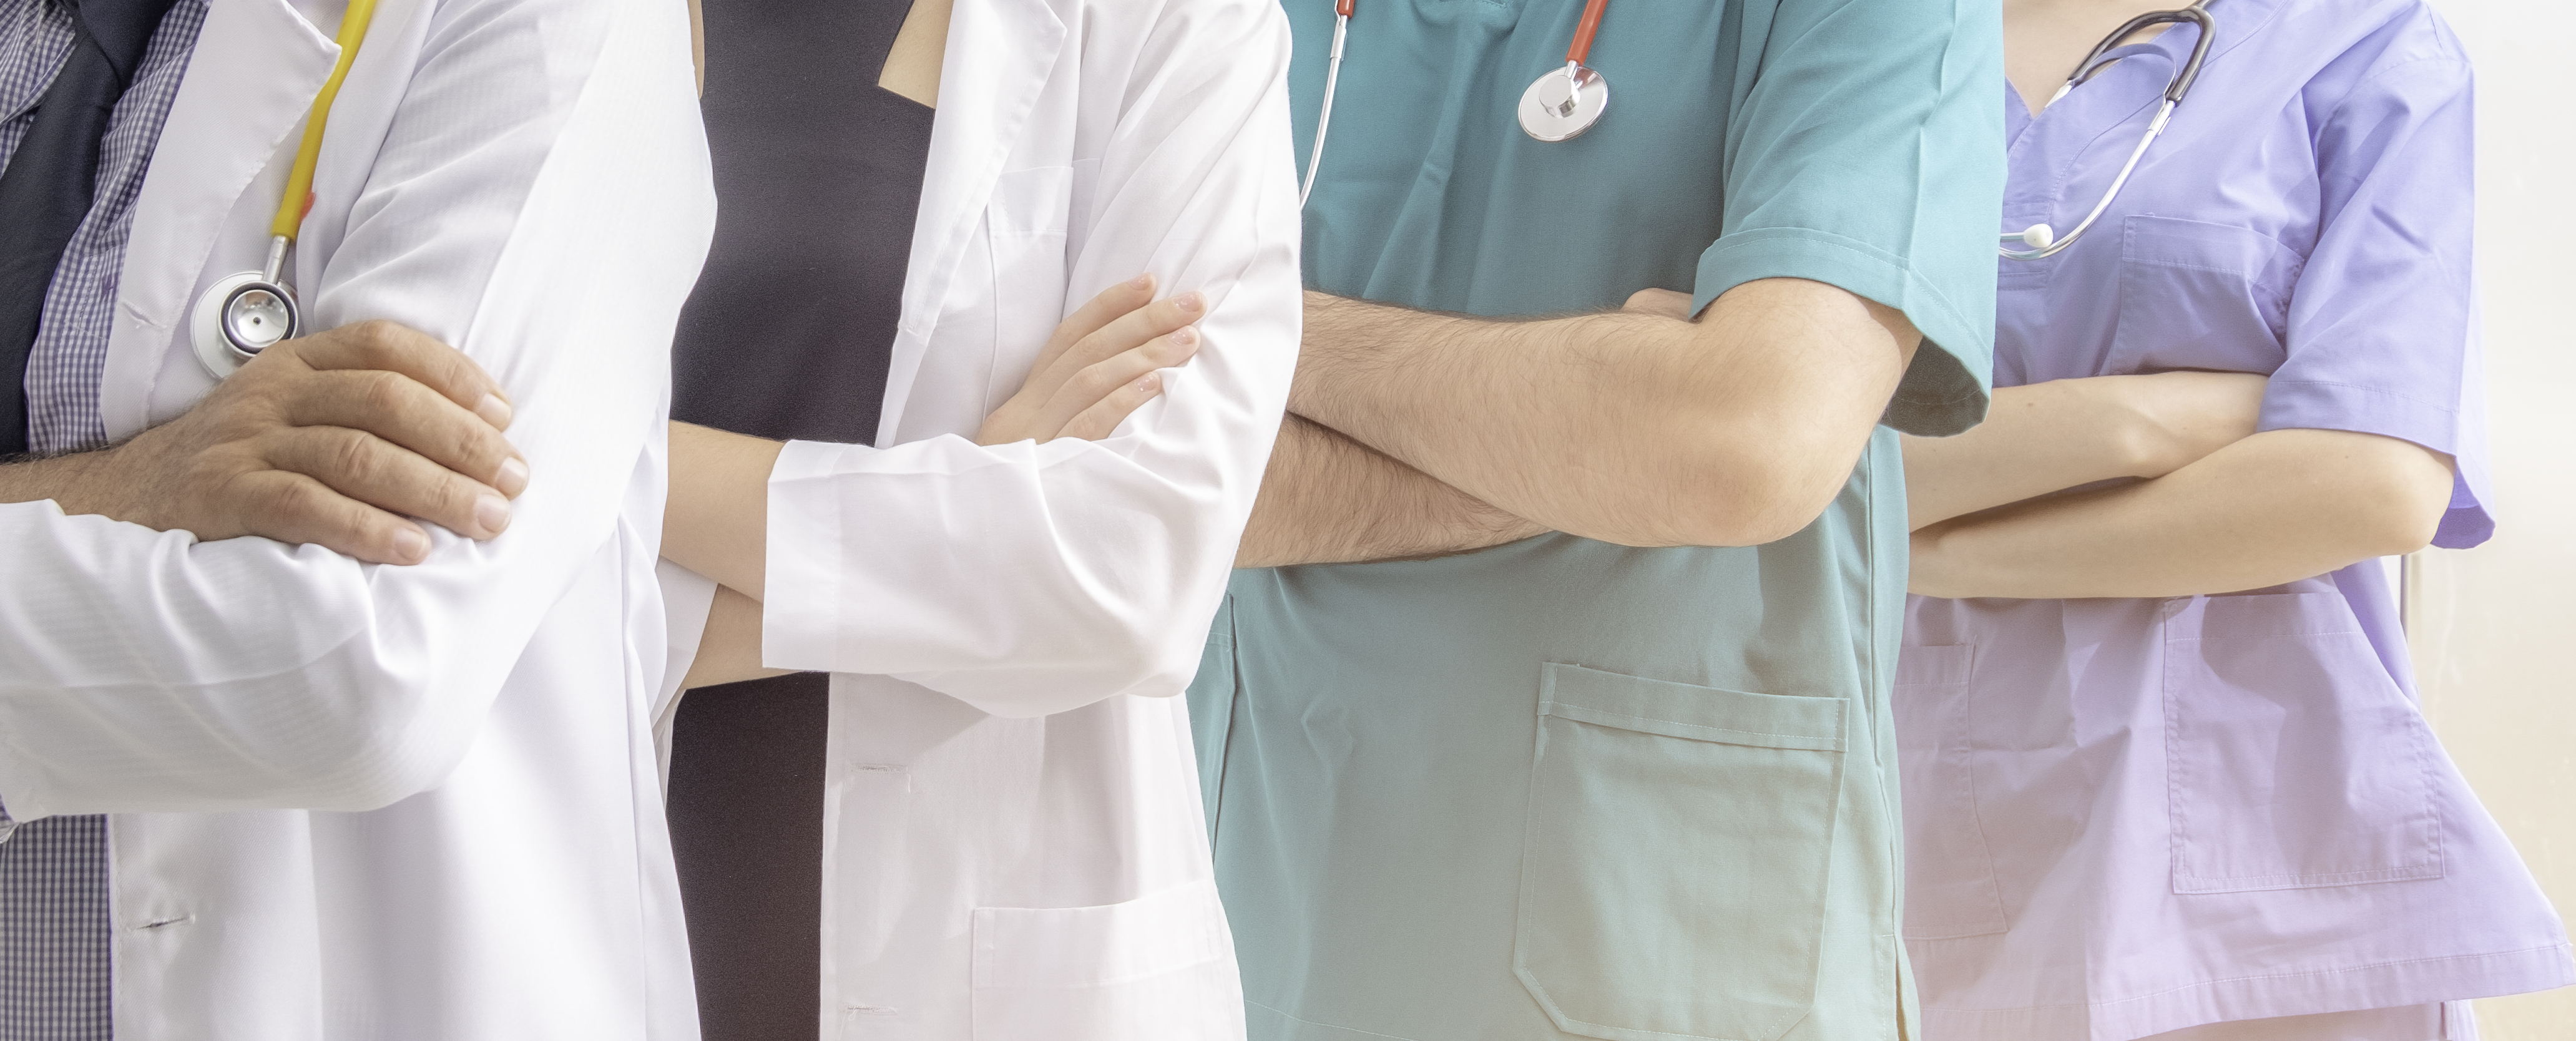 person-wearing-white-lab-coat-next-to-person-with-crossed-arms-wearing-blue-green-scrubs-and-stethoscope